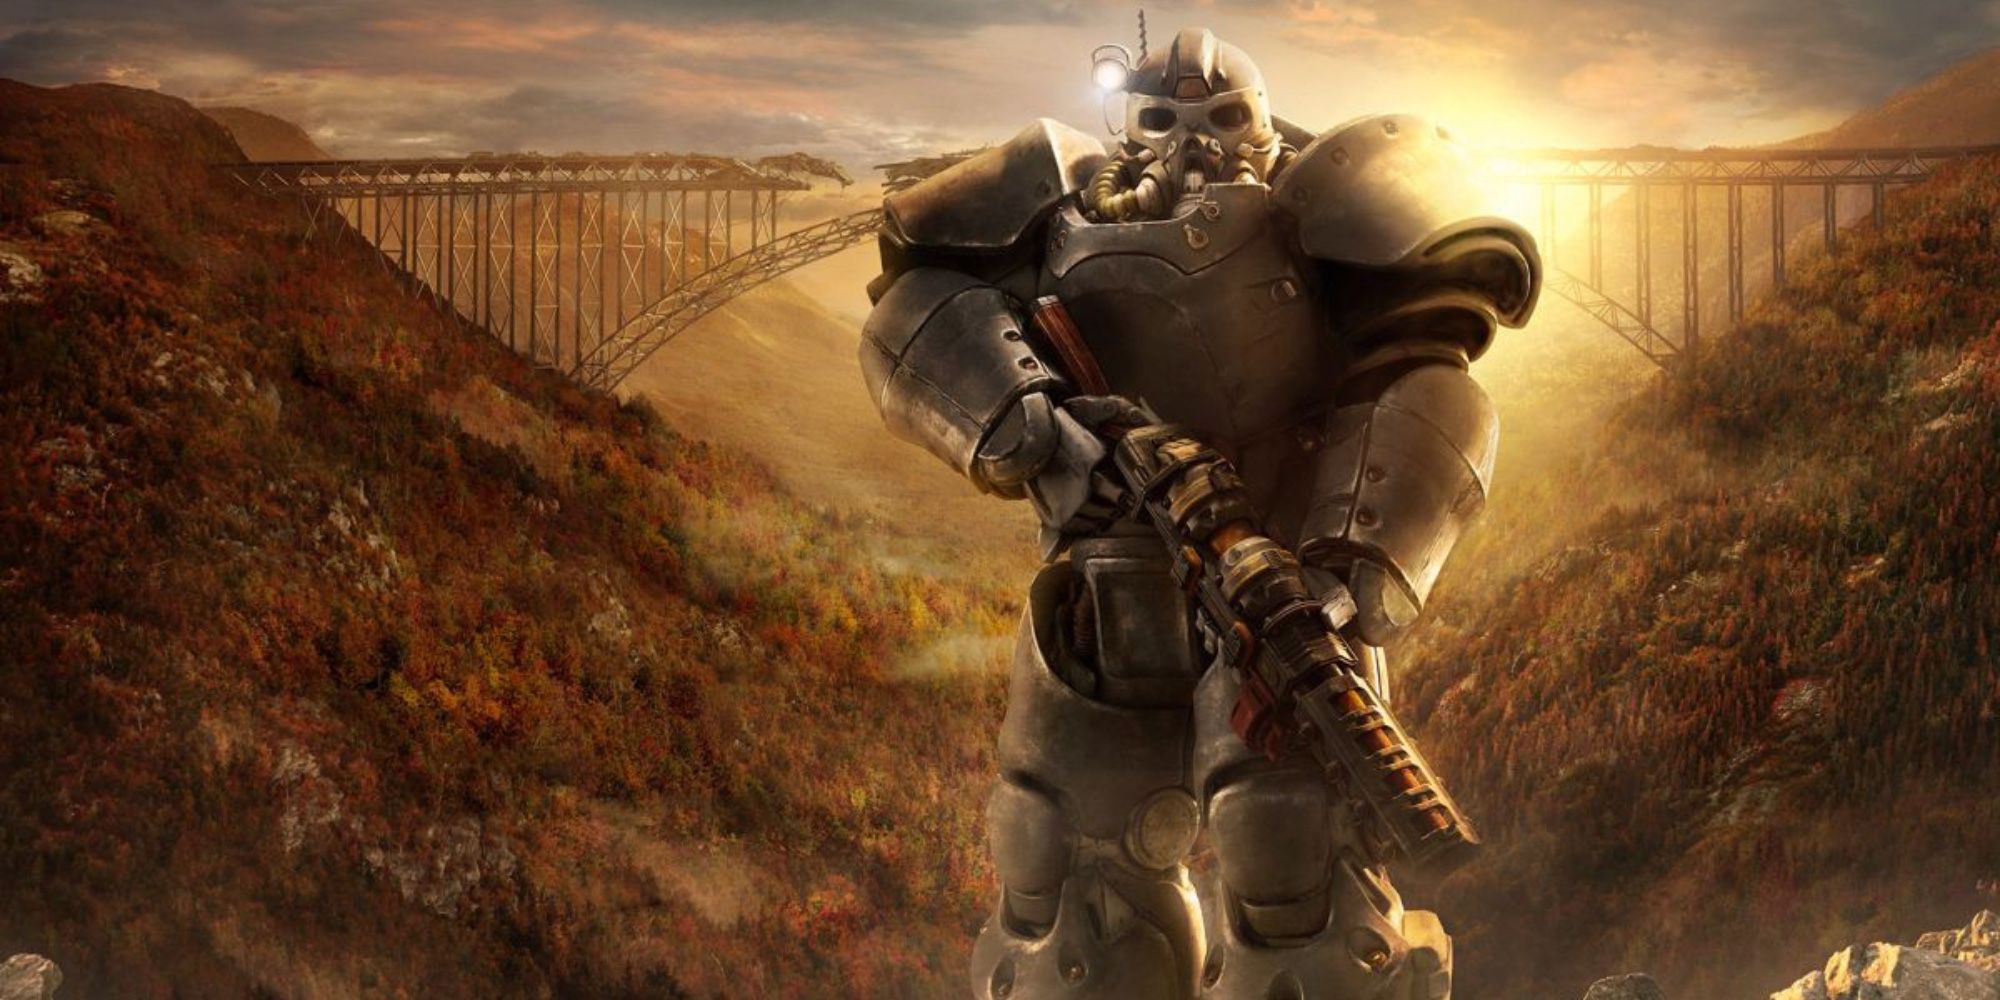 A person in Power Armor walks forward with a massive gun in hand and a sunset in the background.